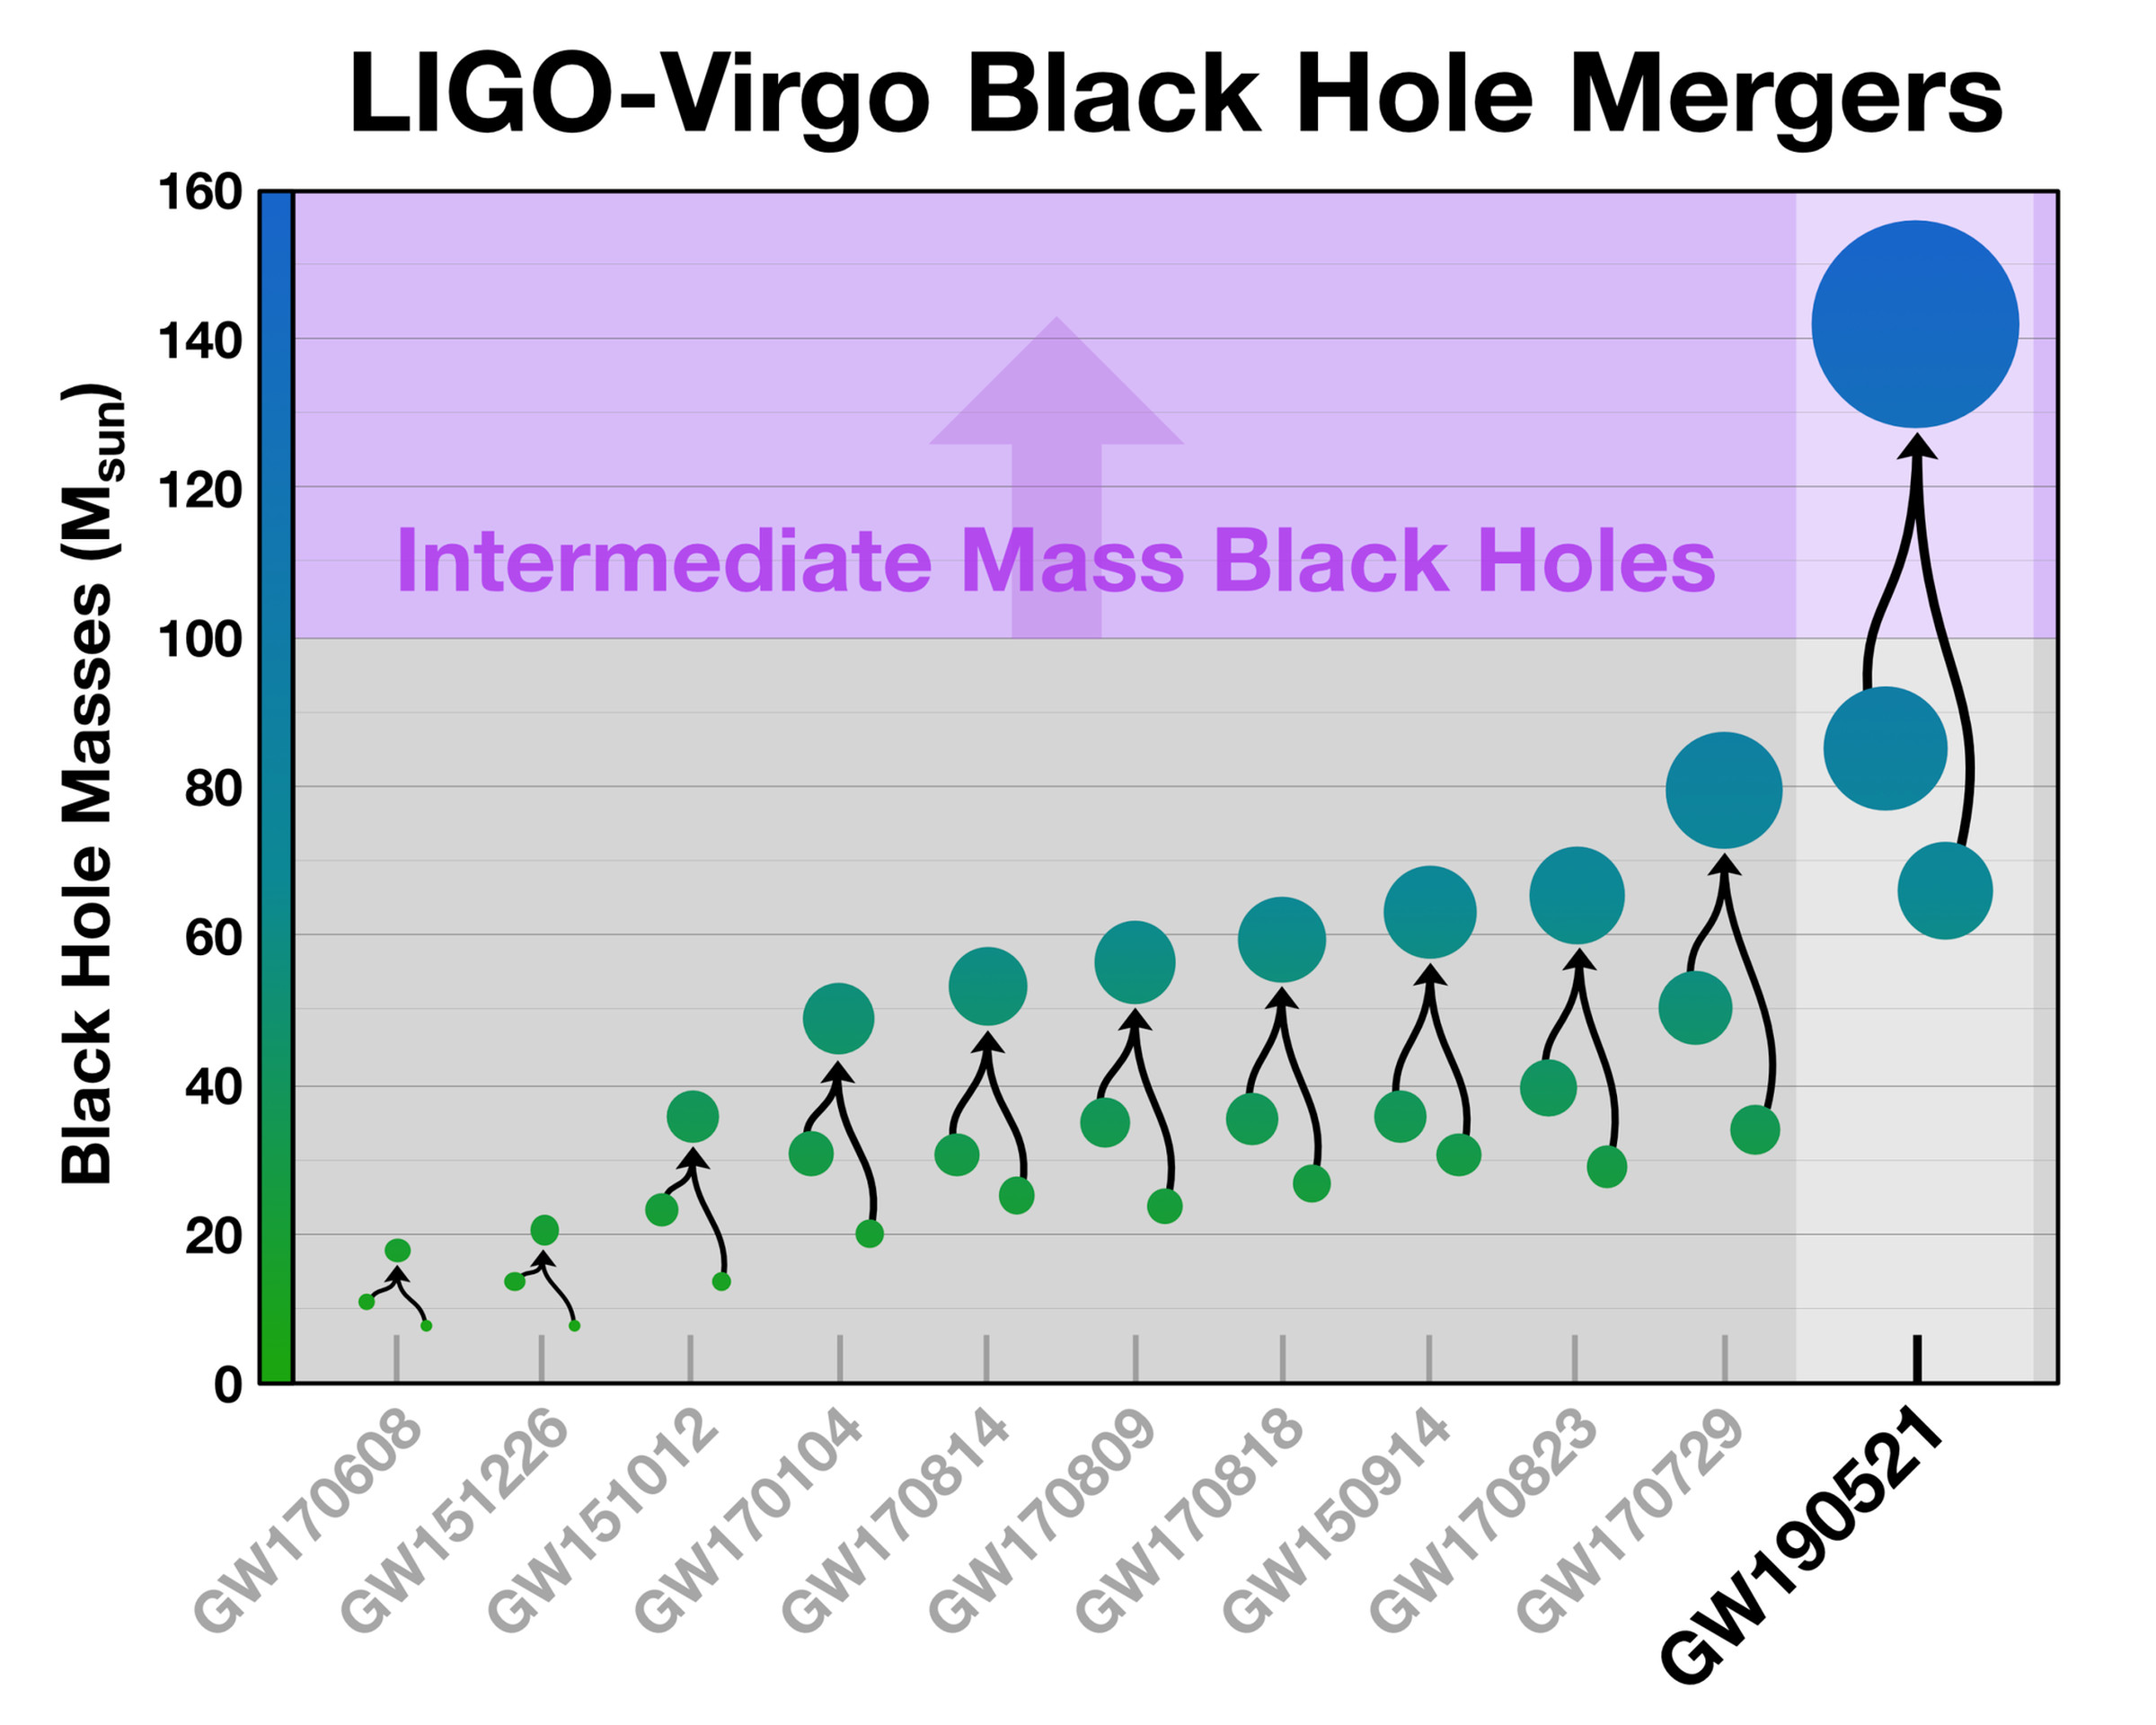 A plot showing GW190521 compared to the masses of other LIGO-Virgo black hole mergers